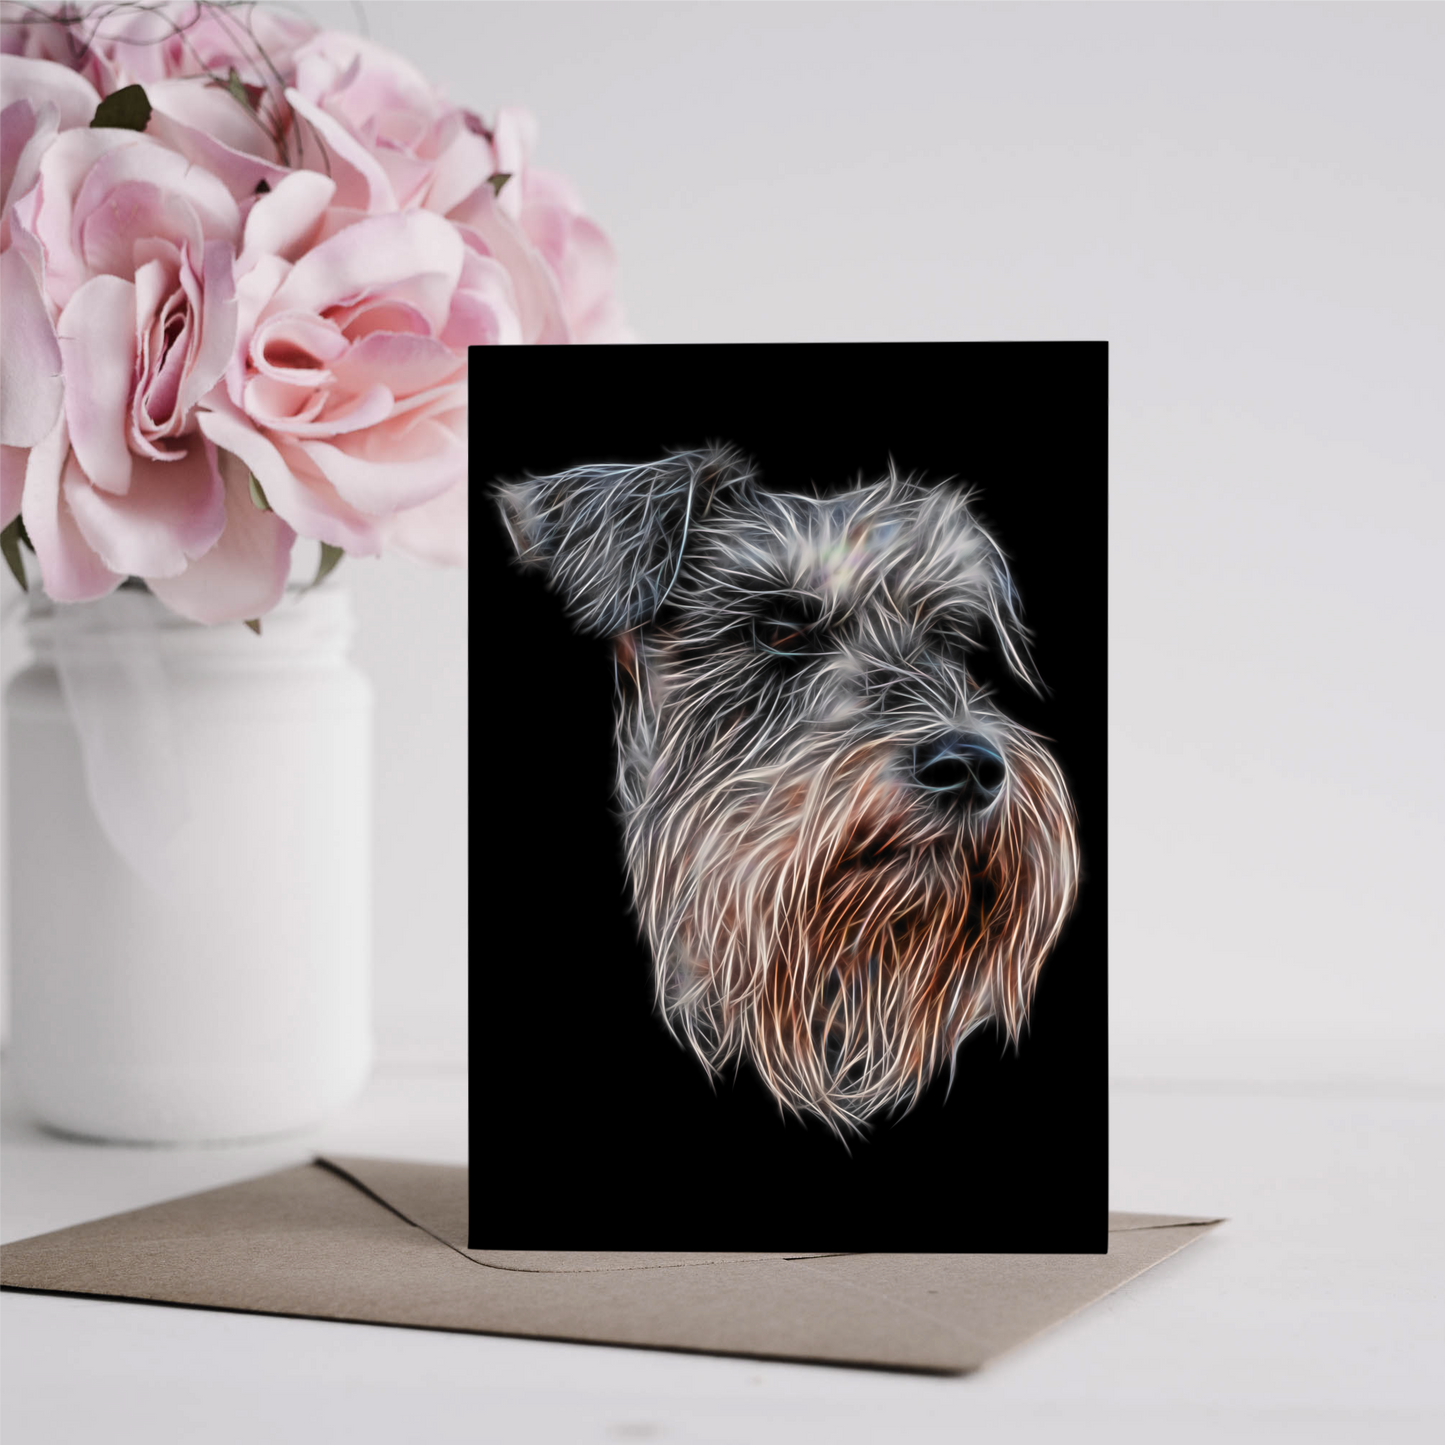 Salt & Pepper Schnauzer Greeting Card Blank Inside for Birthdays or any other Occasion